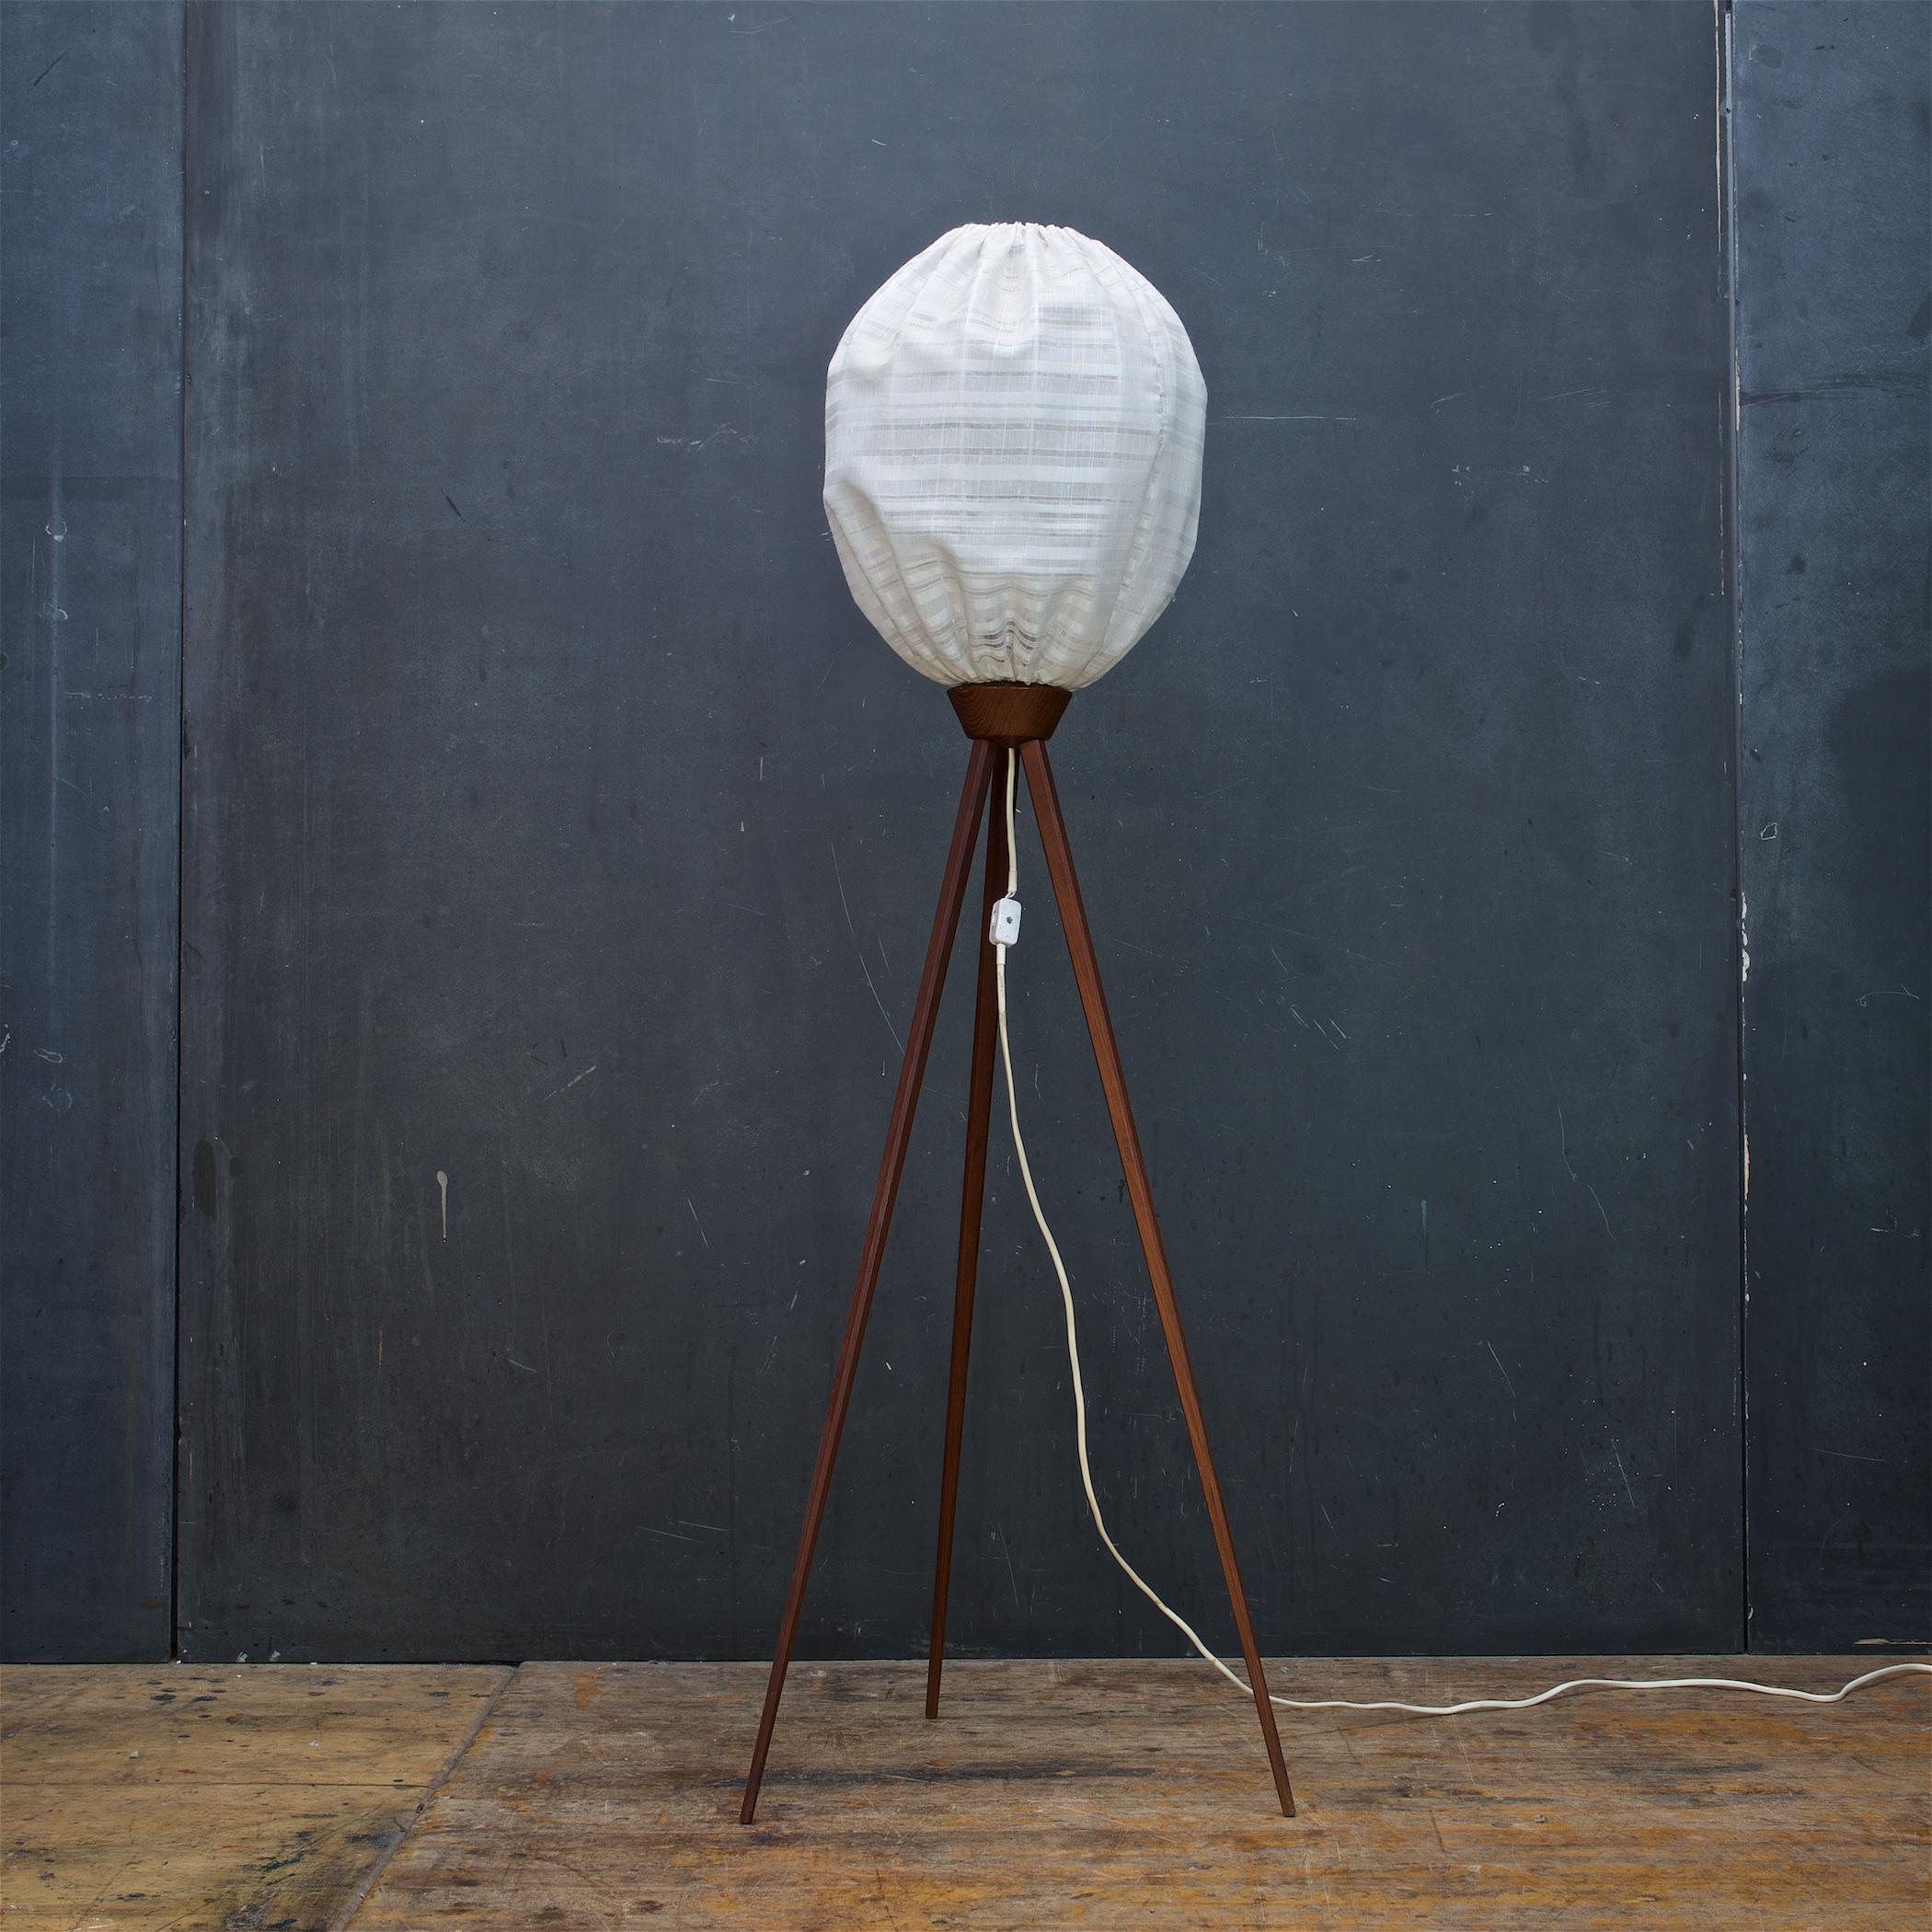 Add a nice warm glow to your interior, or even re-upholster the beehive to better match your interior. Lower style floor lamp at just under 4 feet.